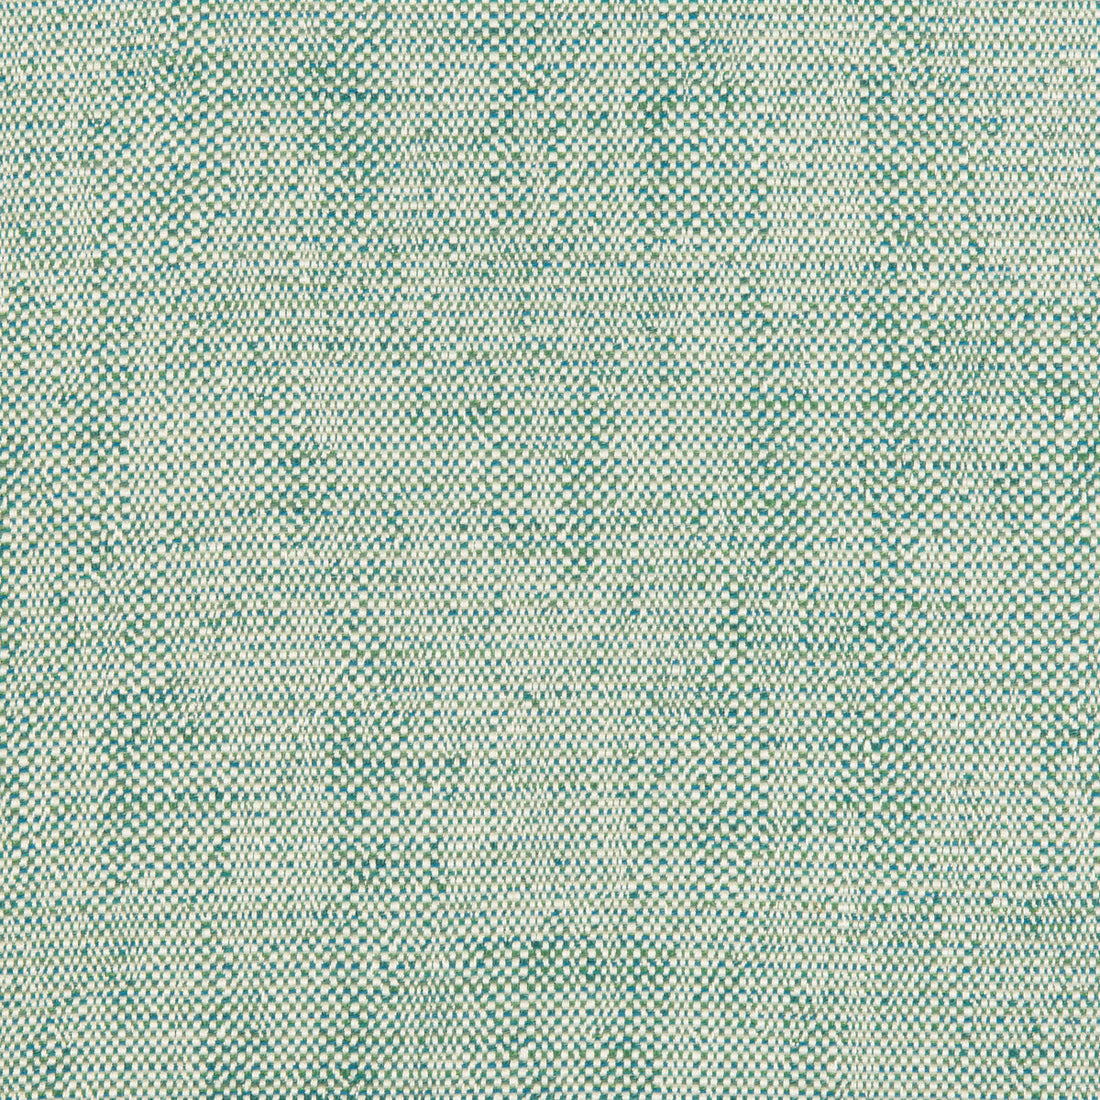 Kravet Contract fabric in 35132-13 color - pattern 35132.13.0 - by Kravet Contract in the Incase Crypton Gis collection